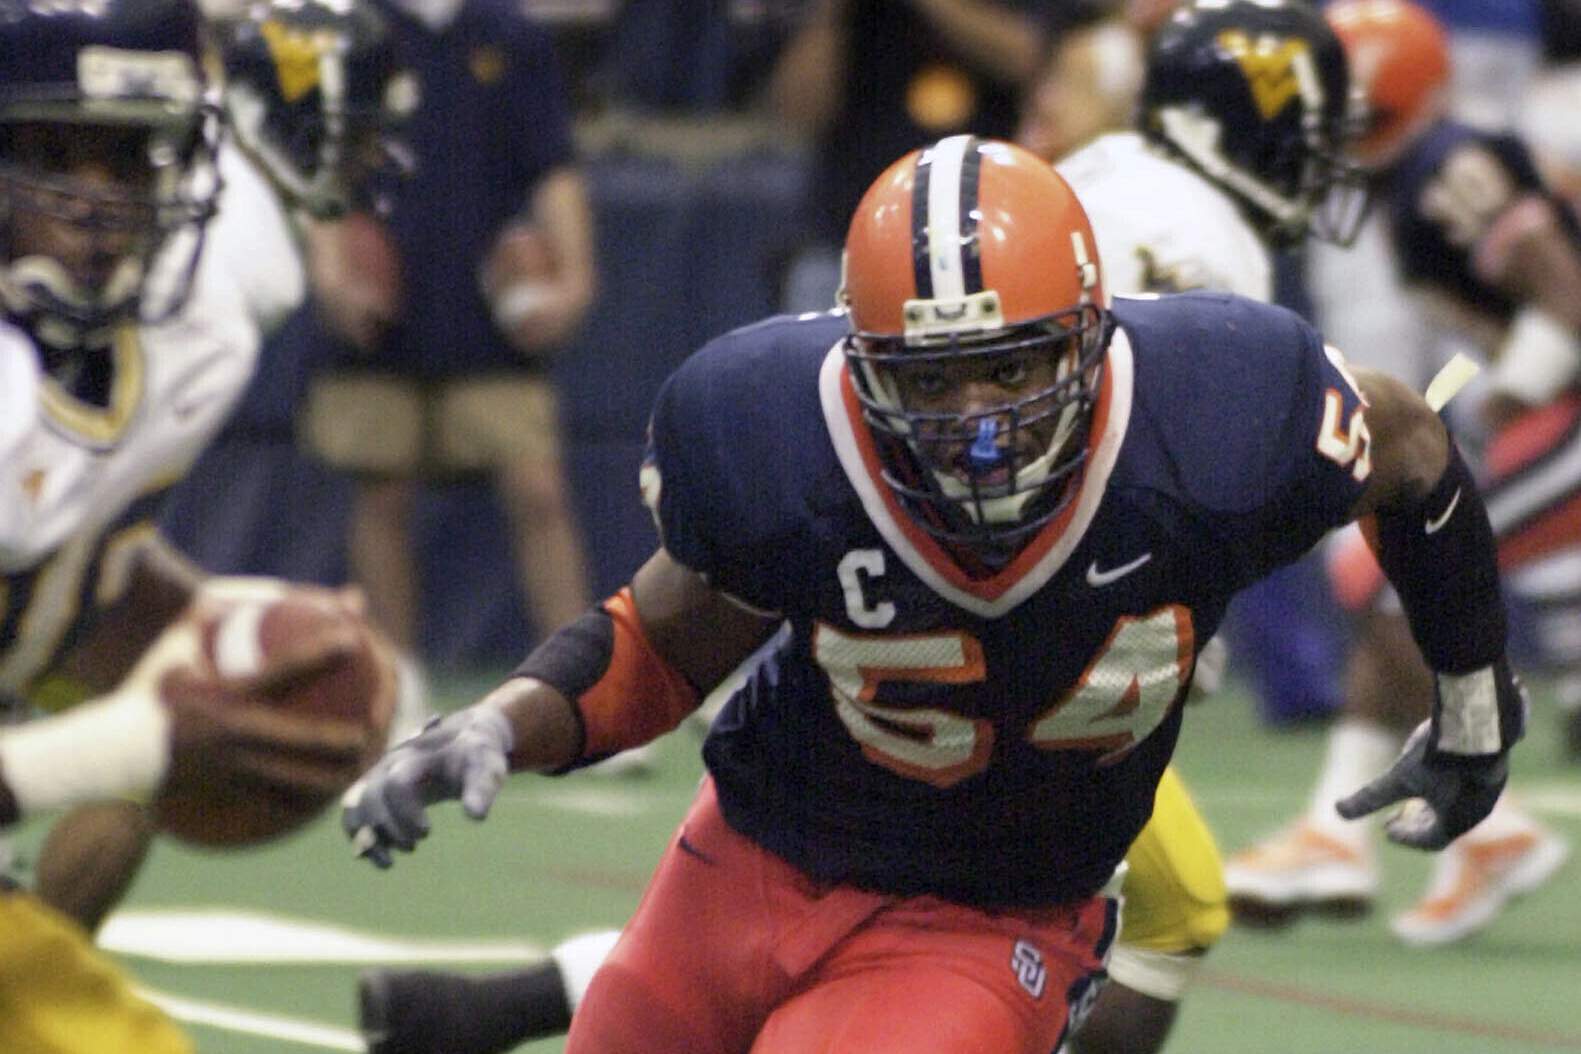 Bailey, Freeney debut on college Hall of Fame ballot